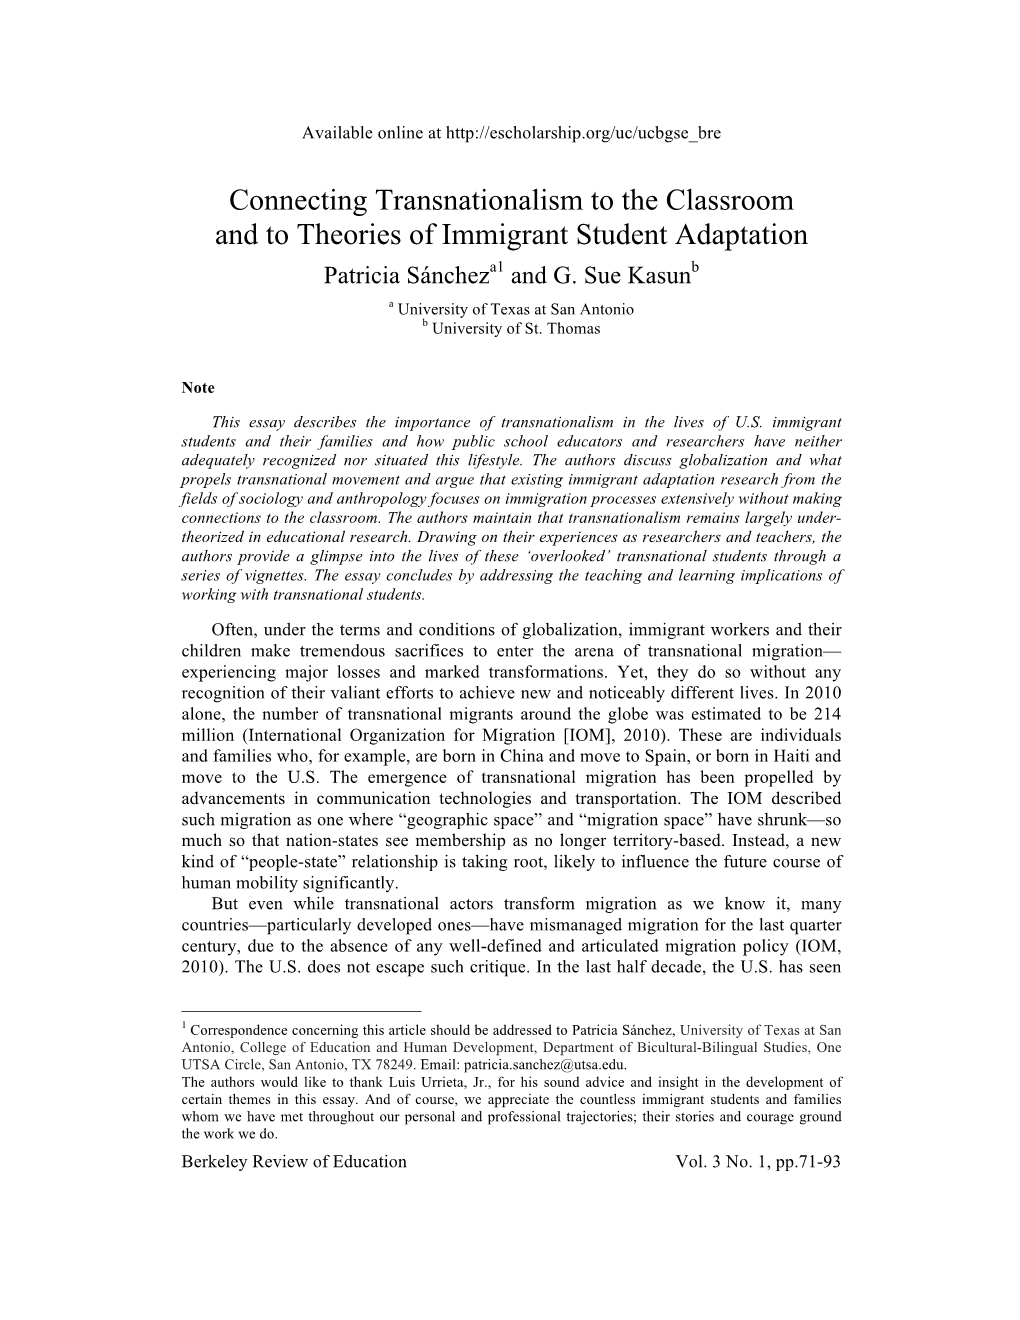 Connecting Transnationalism to the Classroom and to Theories of Immigrant Student Adaptation Patricia Sáncheza1 and G